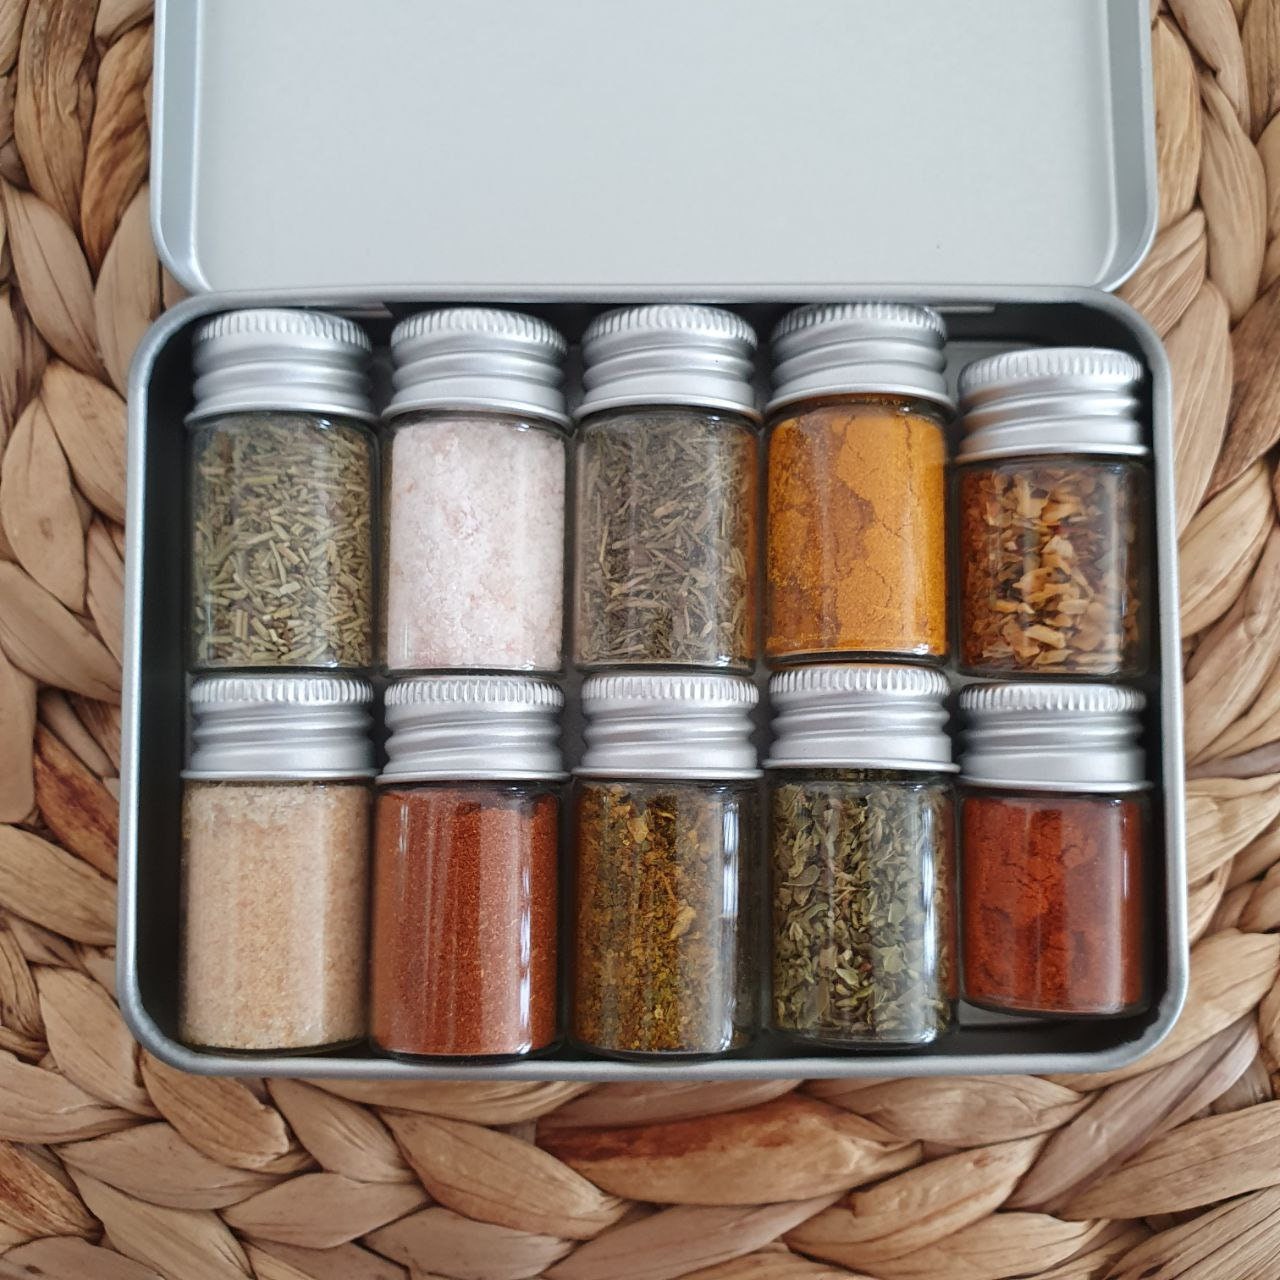 Camping Spice Kit Portable Travel Spice Container Bag, 5 Clear